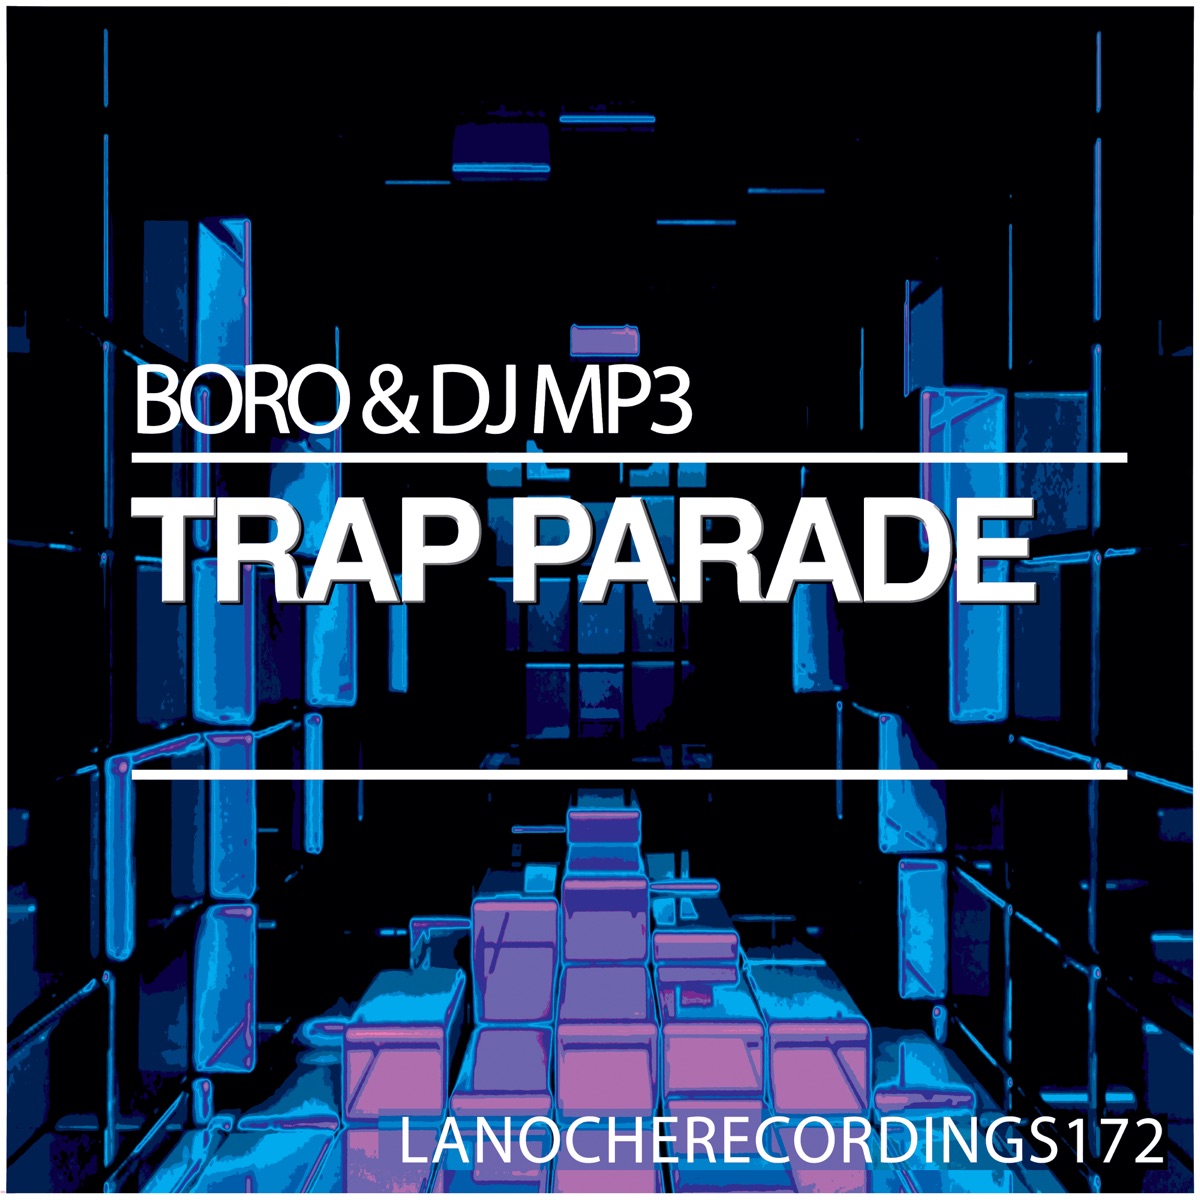 Trap Parade - EP by BORO & DJ MP3 on Apple Music